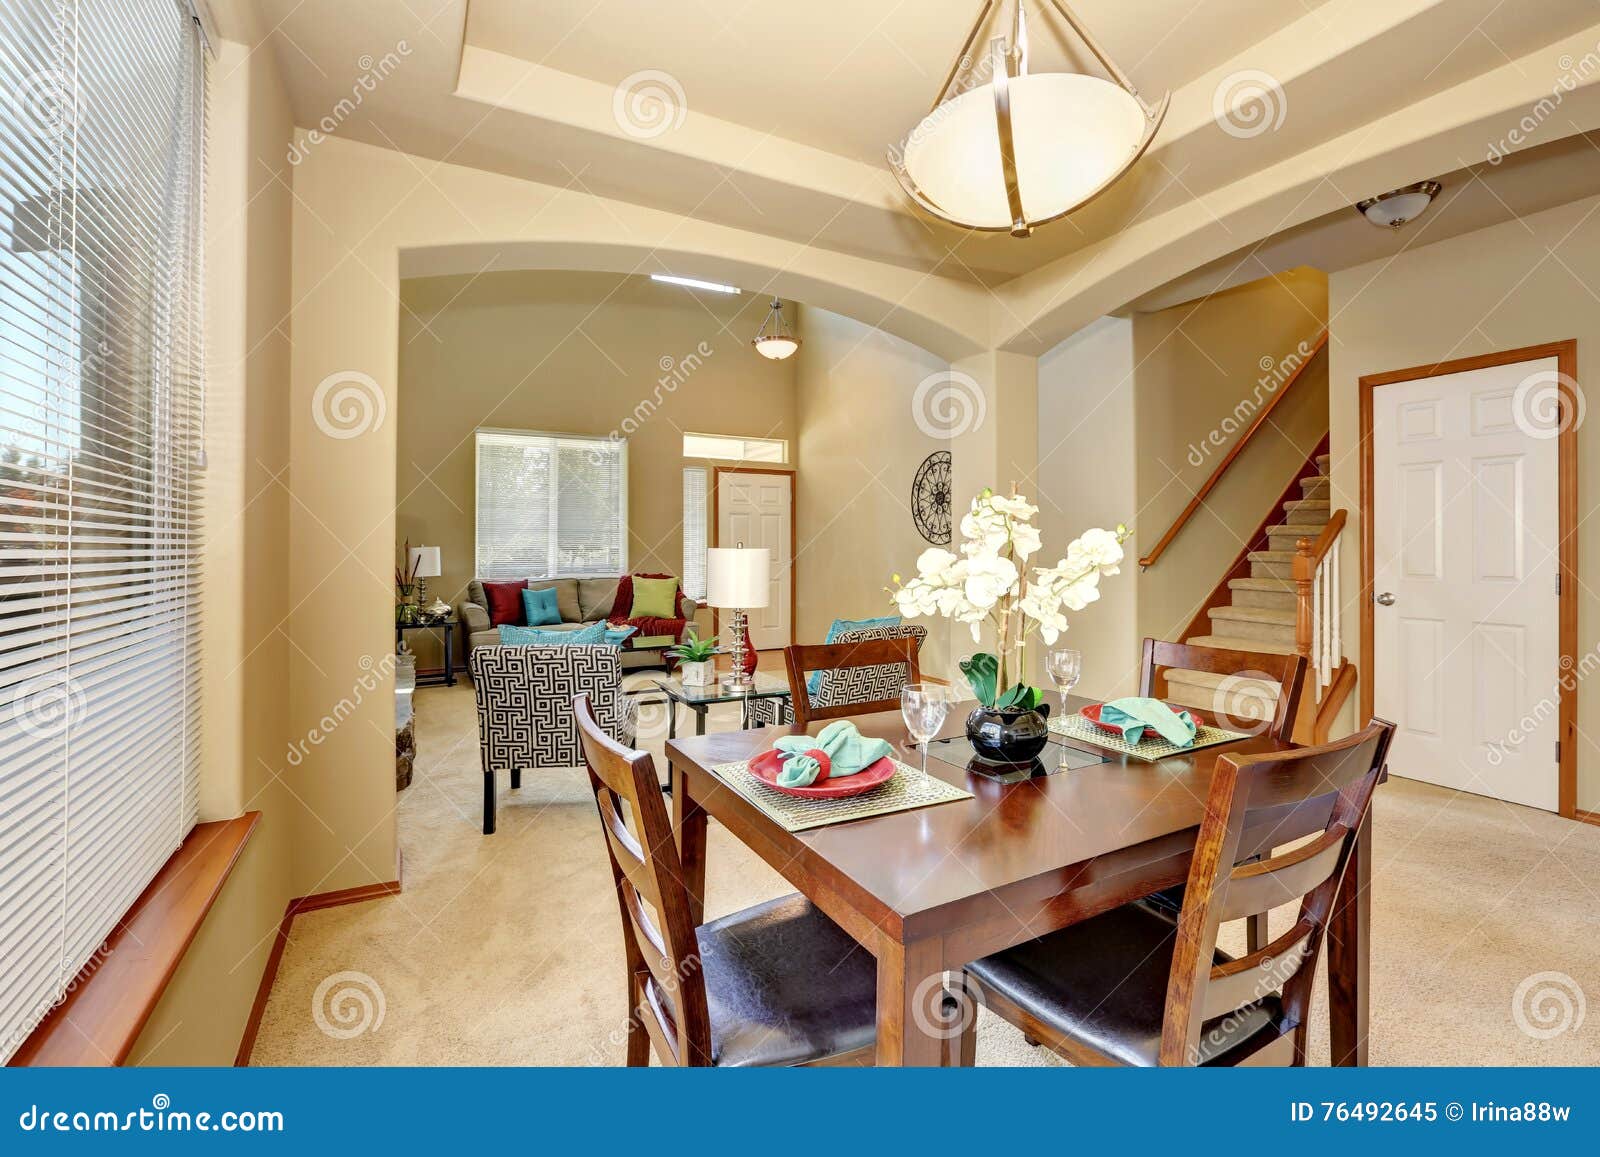 Open Floor Plan Dining Area And Living Room With Entryway Stock